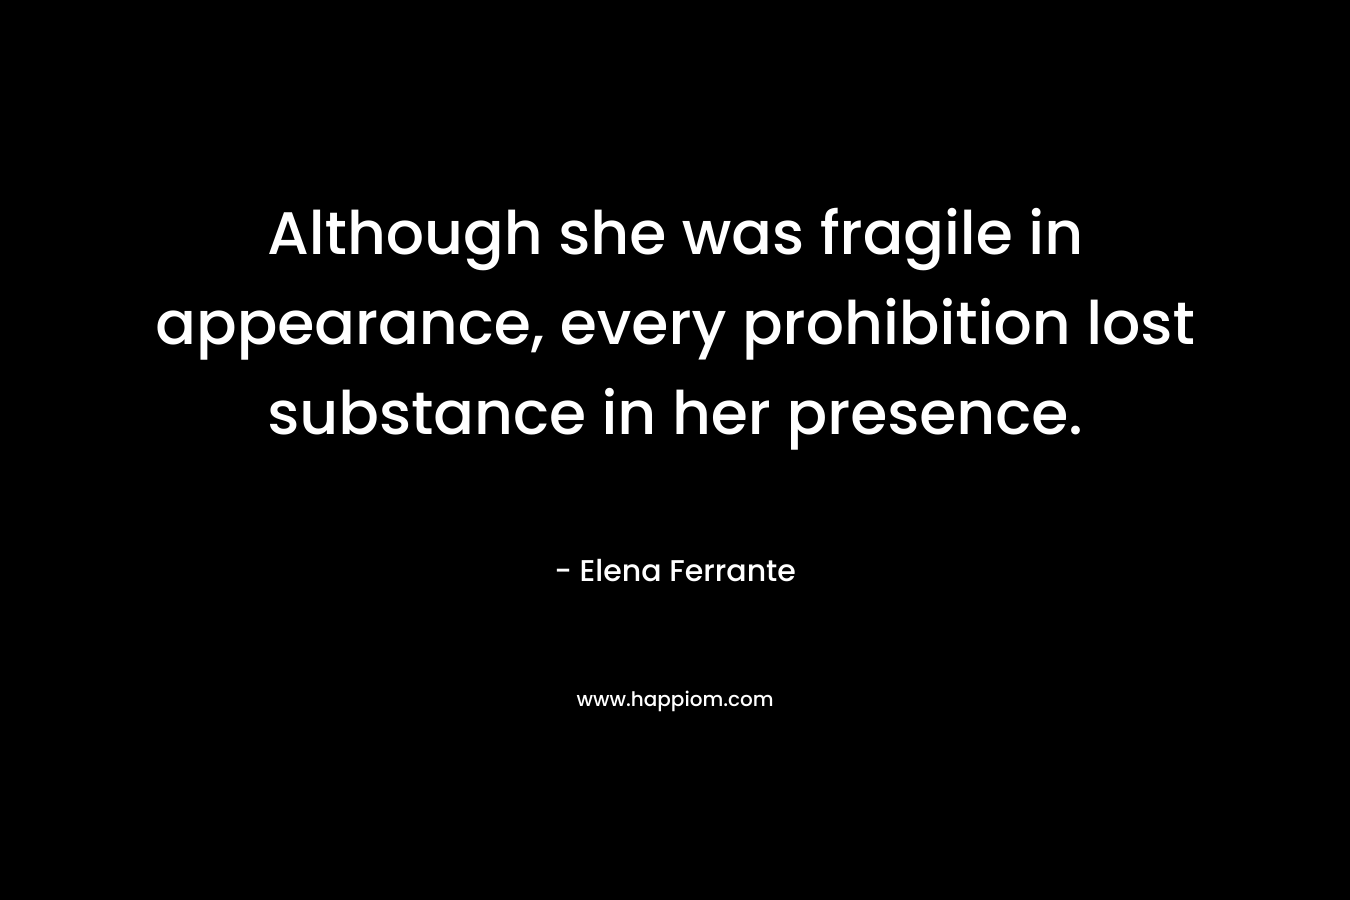 Although she was fragile in appearance, every prohibition lost substance in her presence. – Elena Ferrante